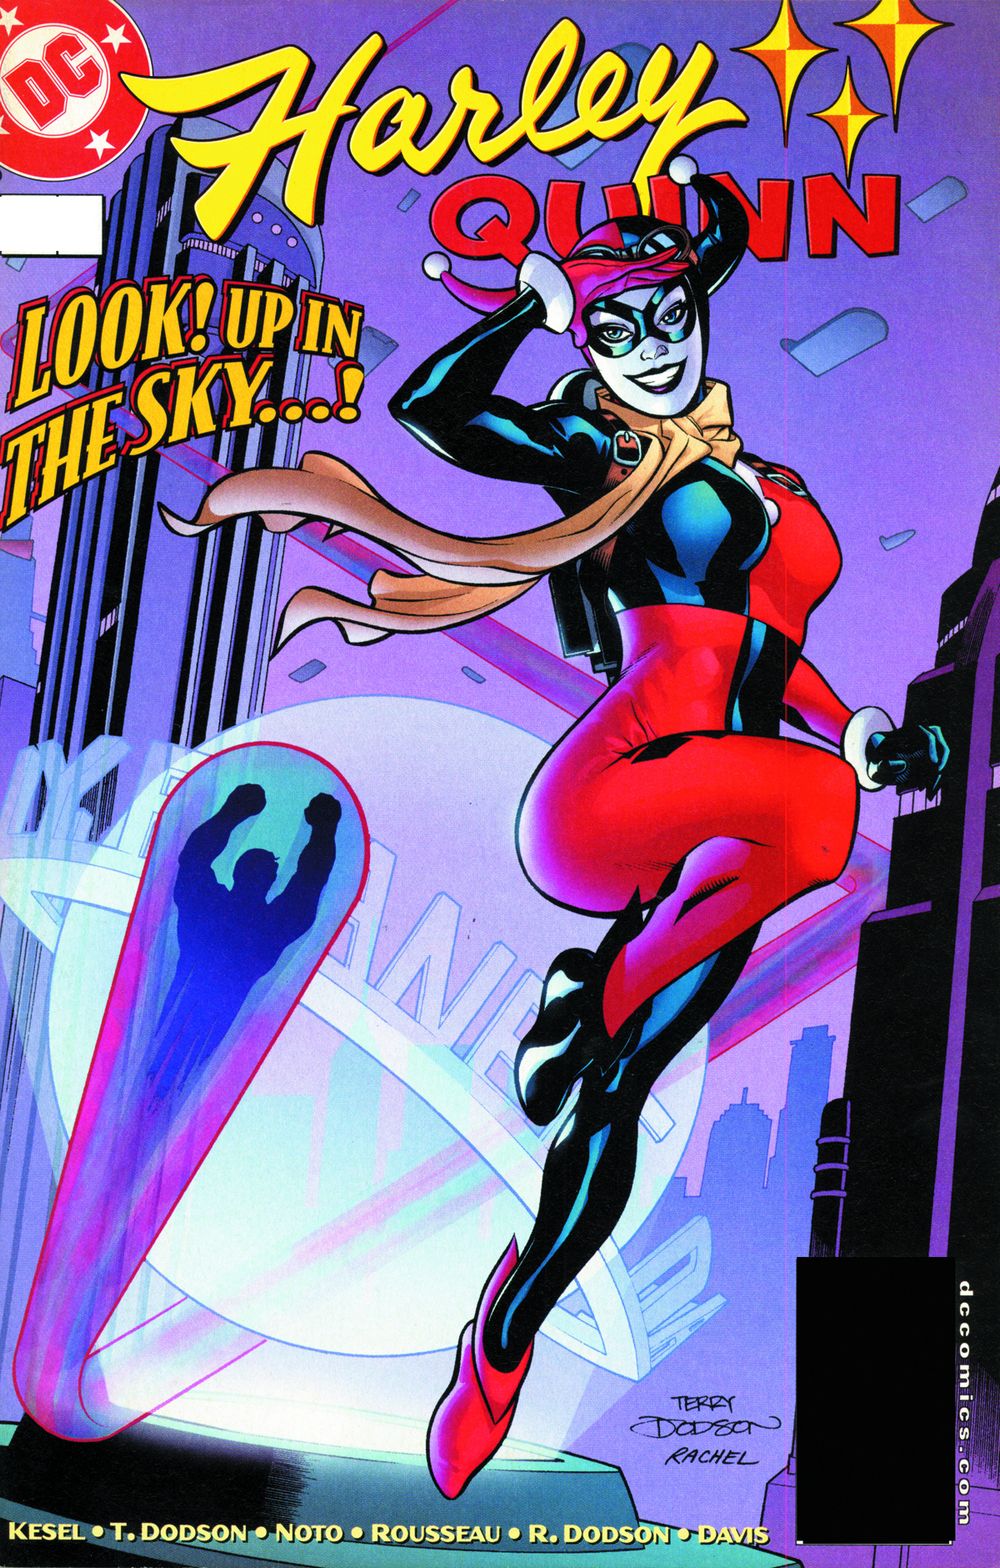 Harley Quinn Welcome To Metropolis TP